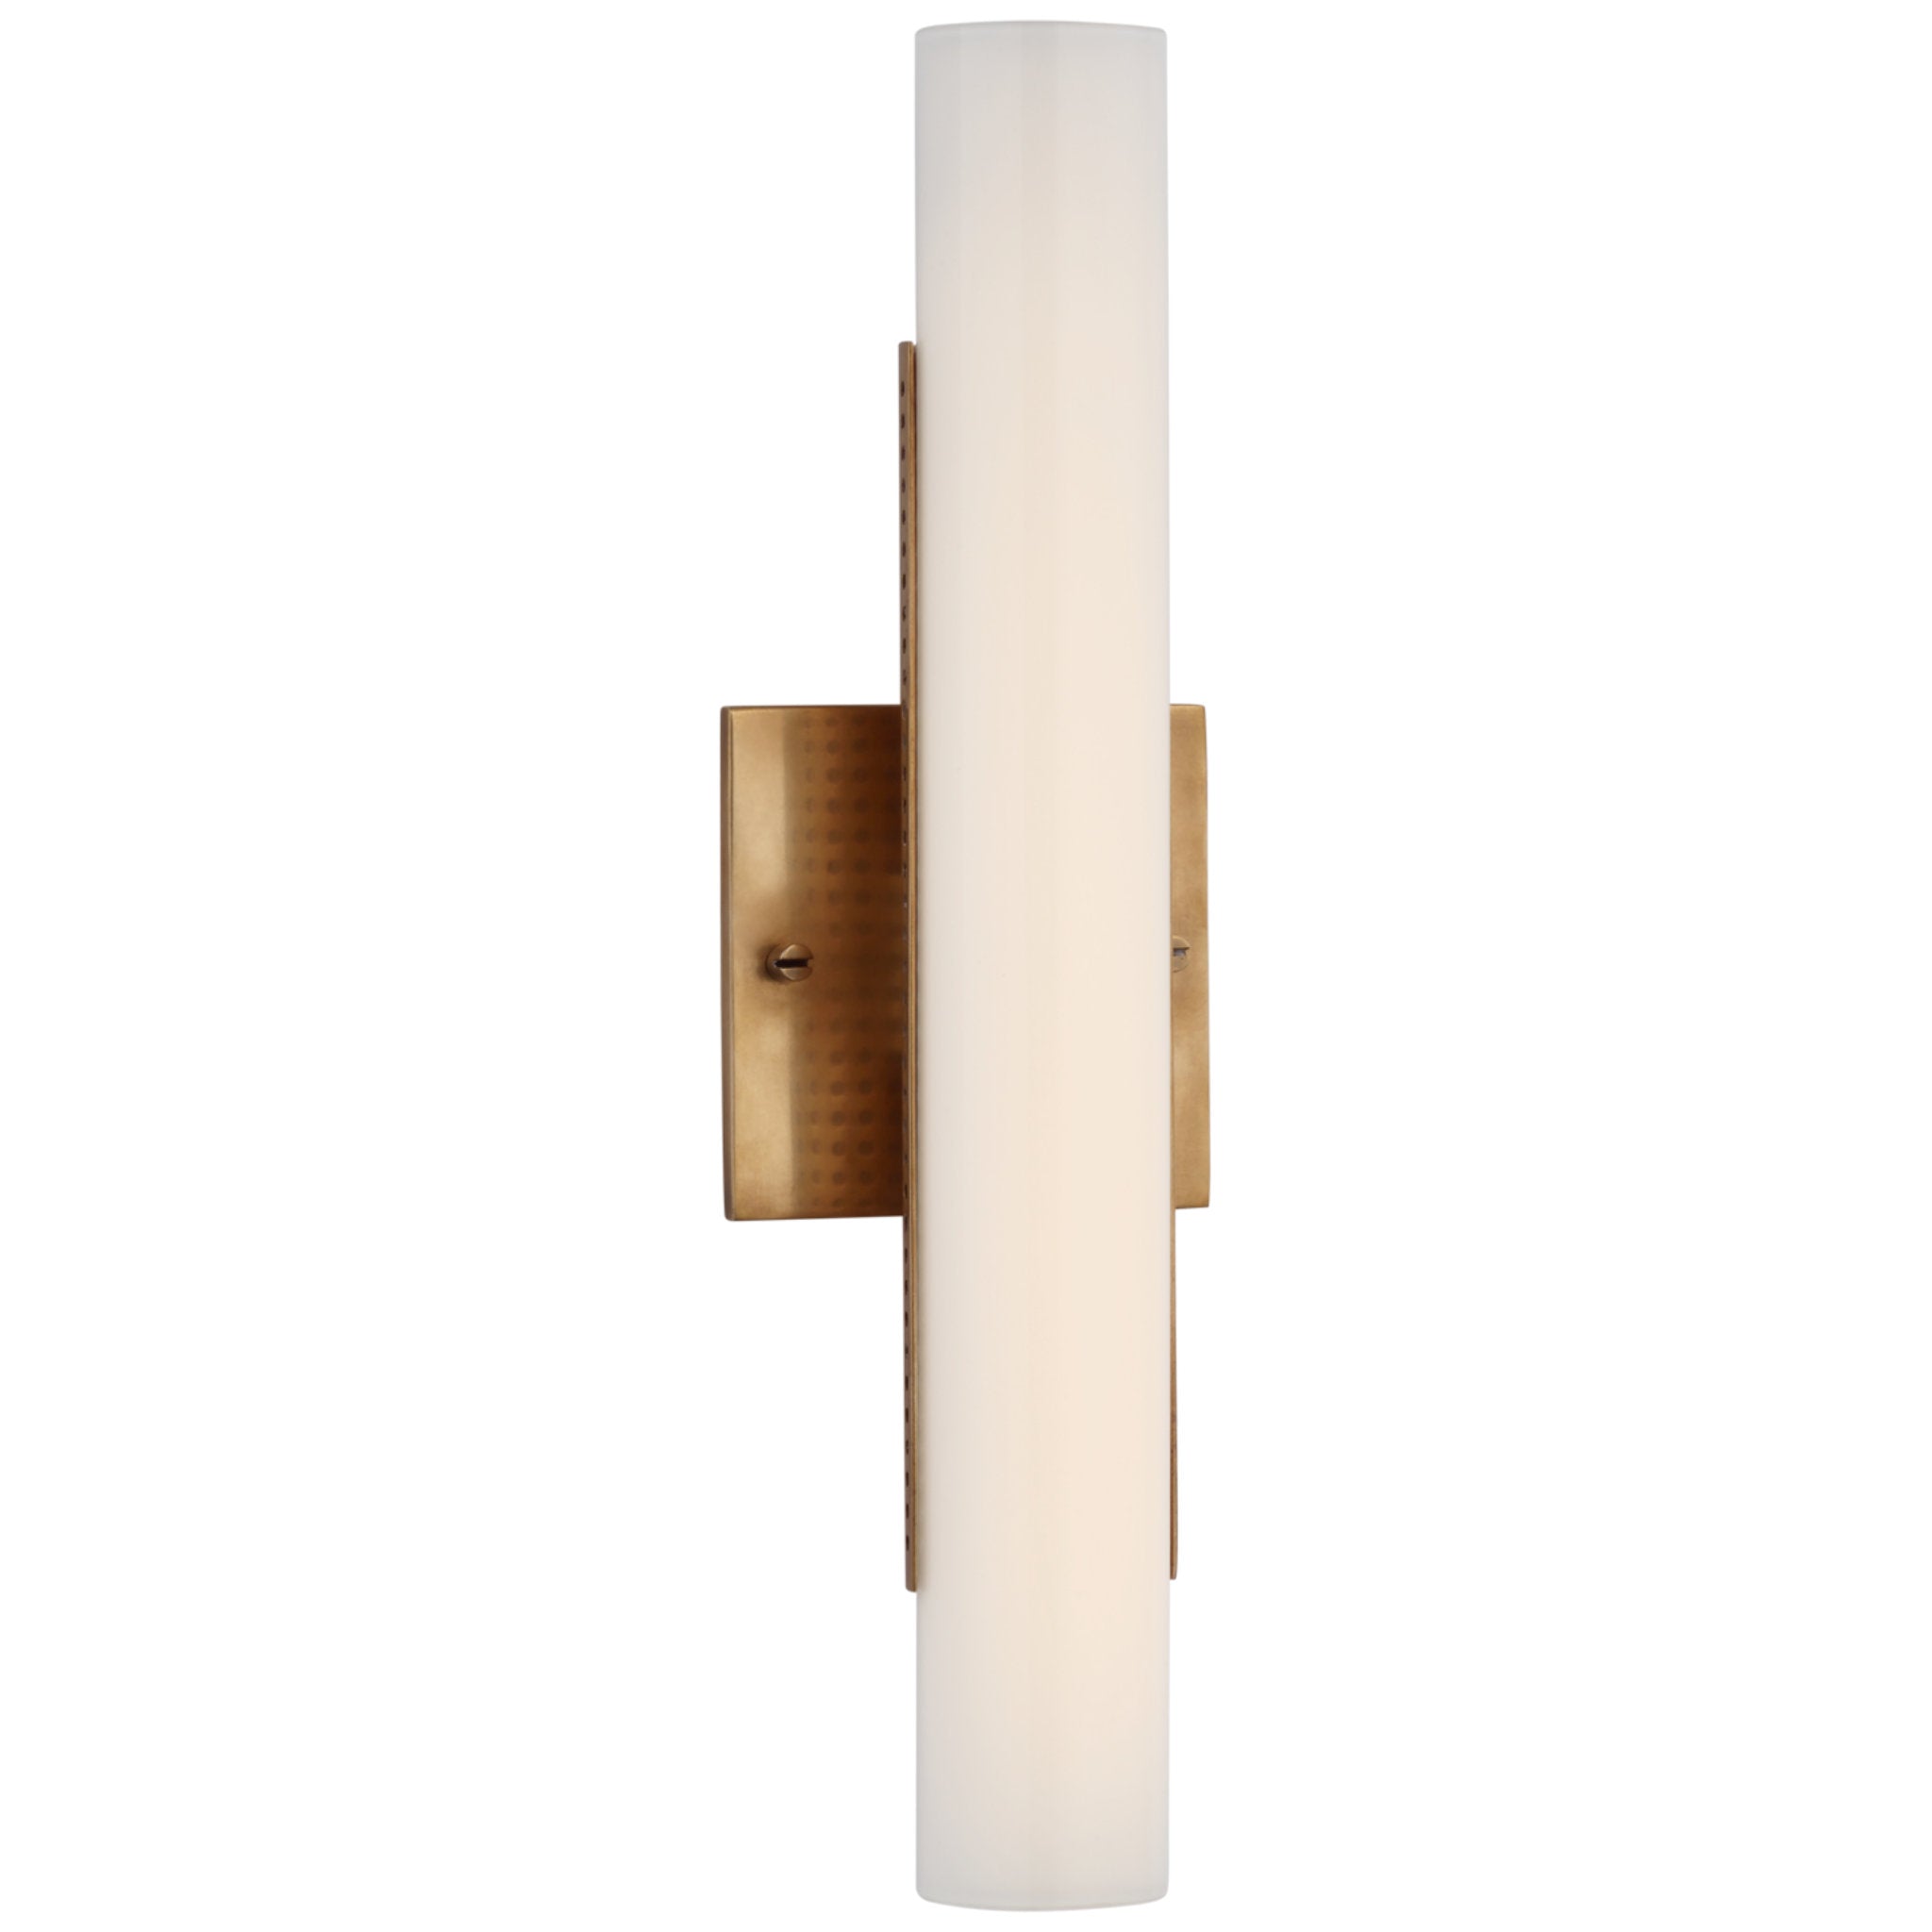 Kelly Wearstler Precision 15" Bath Light in Antique-Burnished Brass with White Glass